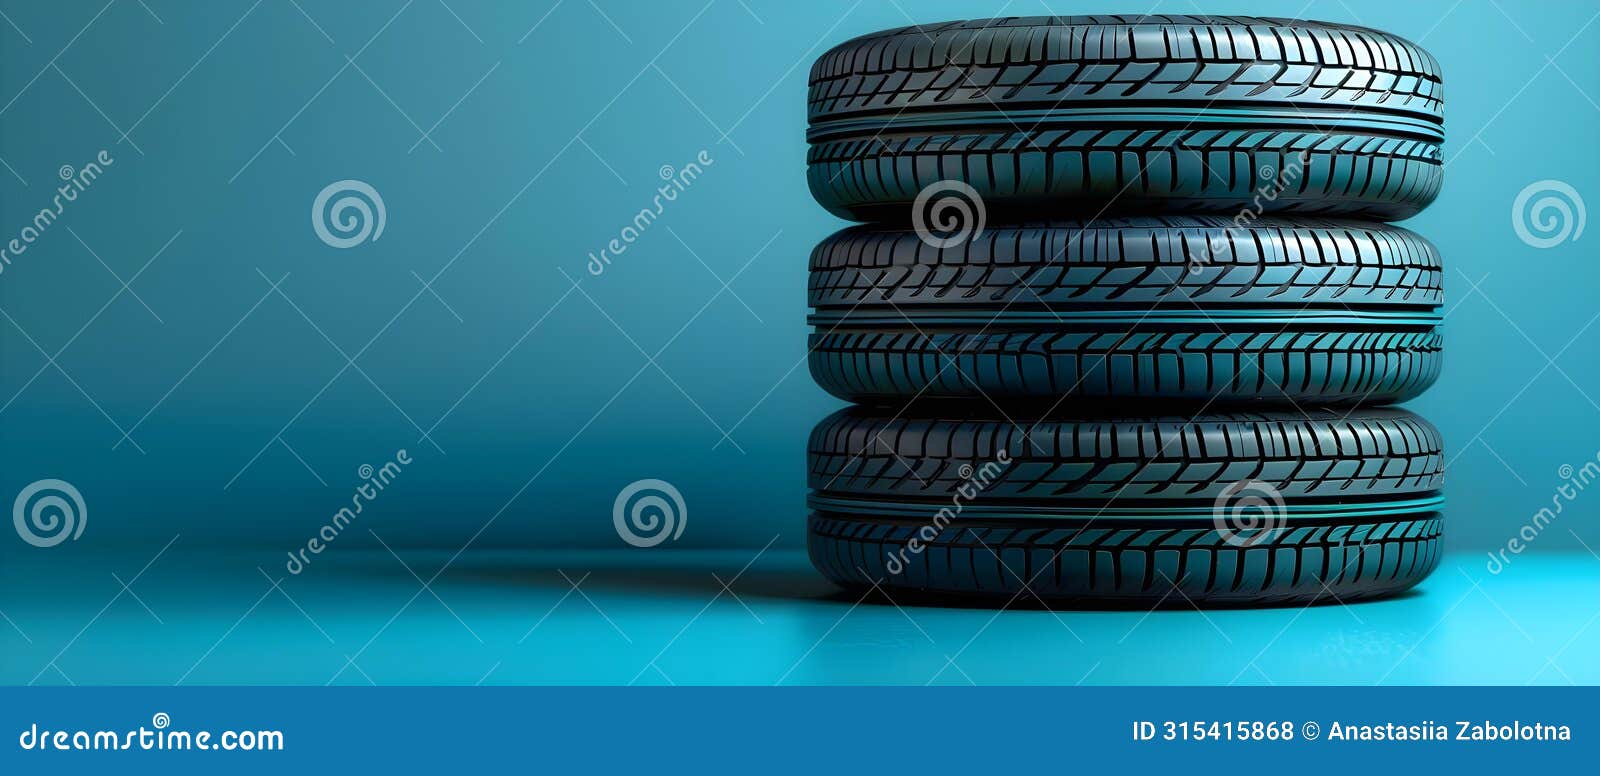 precision in simplicity: your tire care solution. concept tire maintenance, vehicle safety, simple